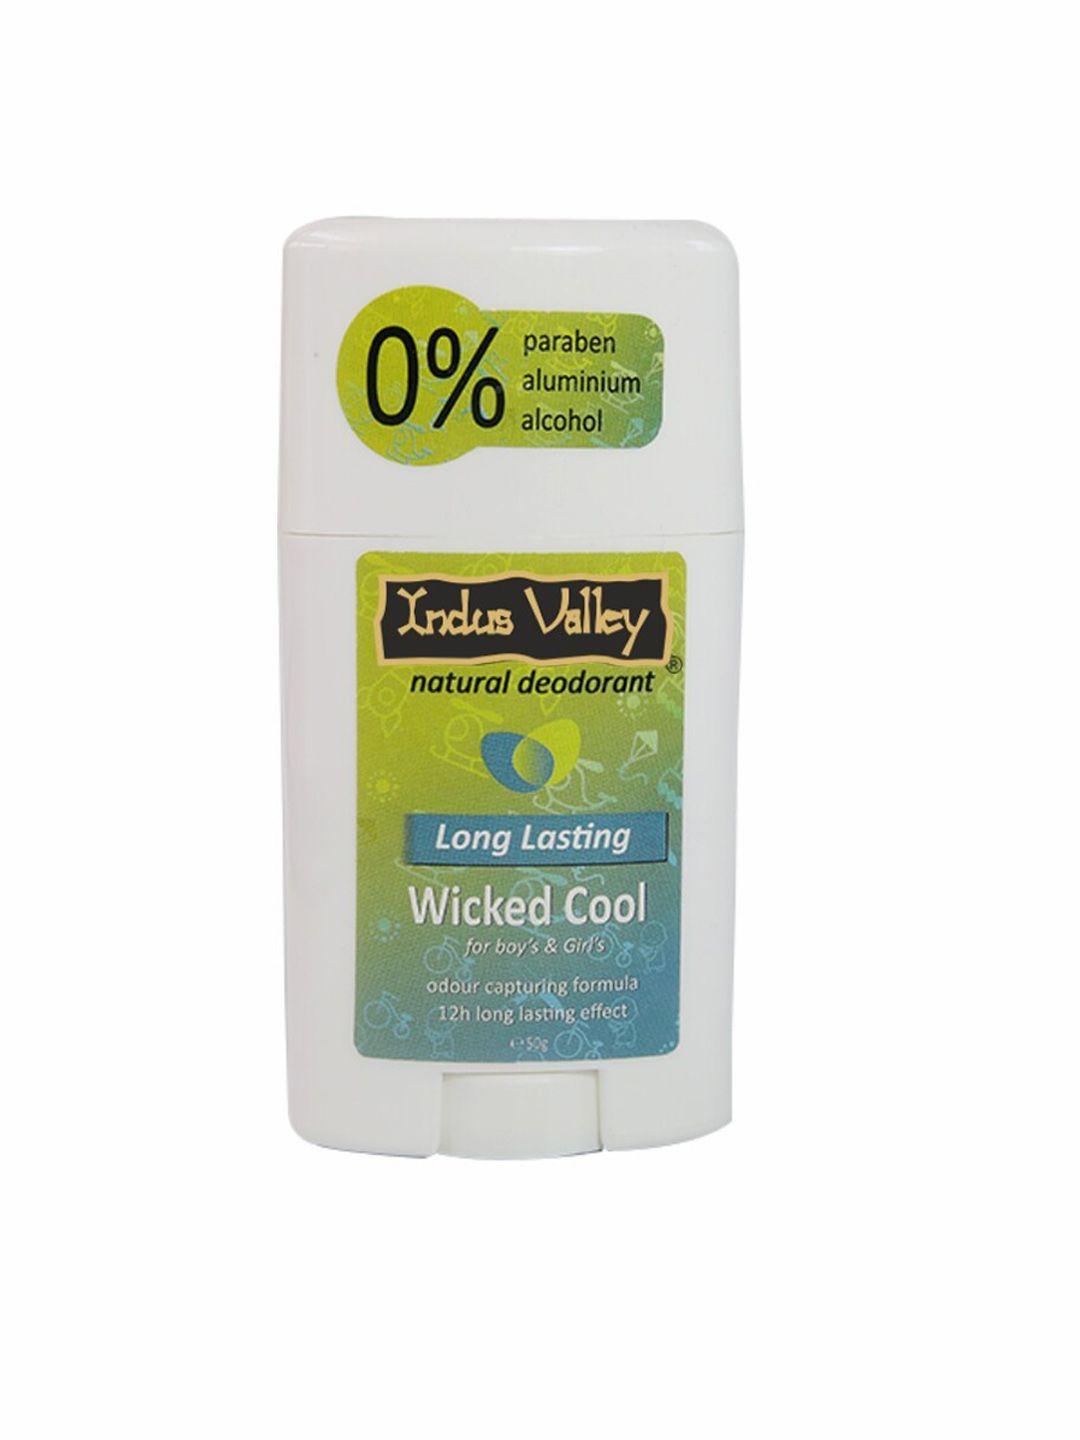 indus valley unisex wicked cool natural deodorant - 50 g